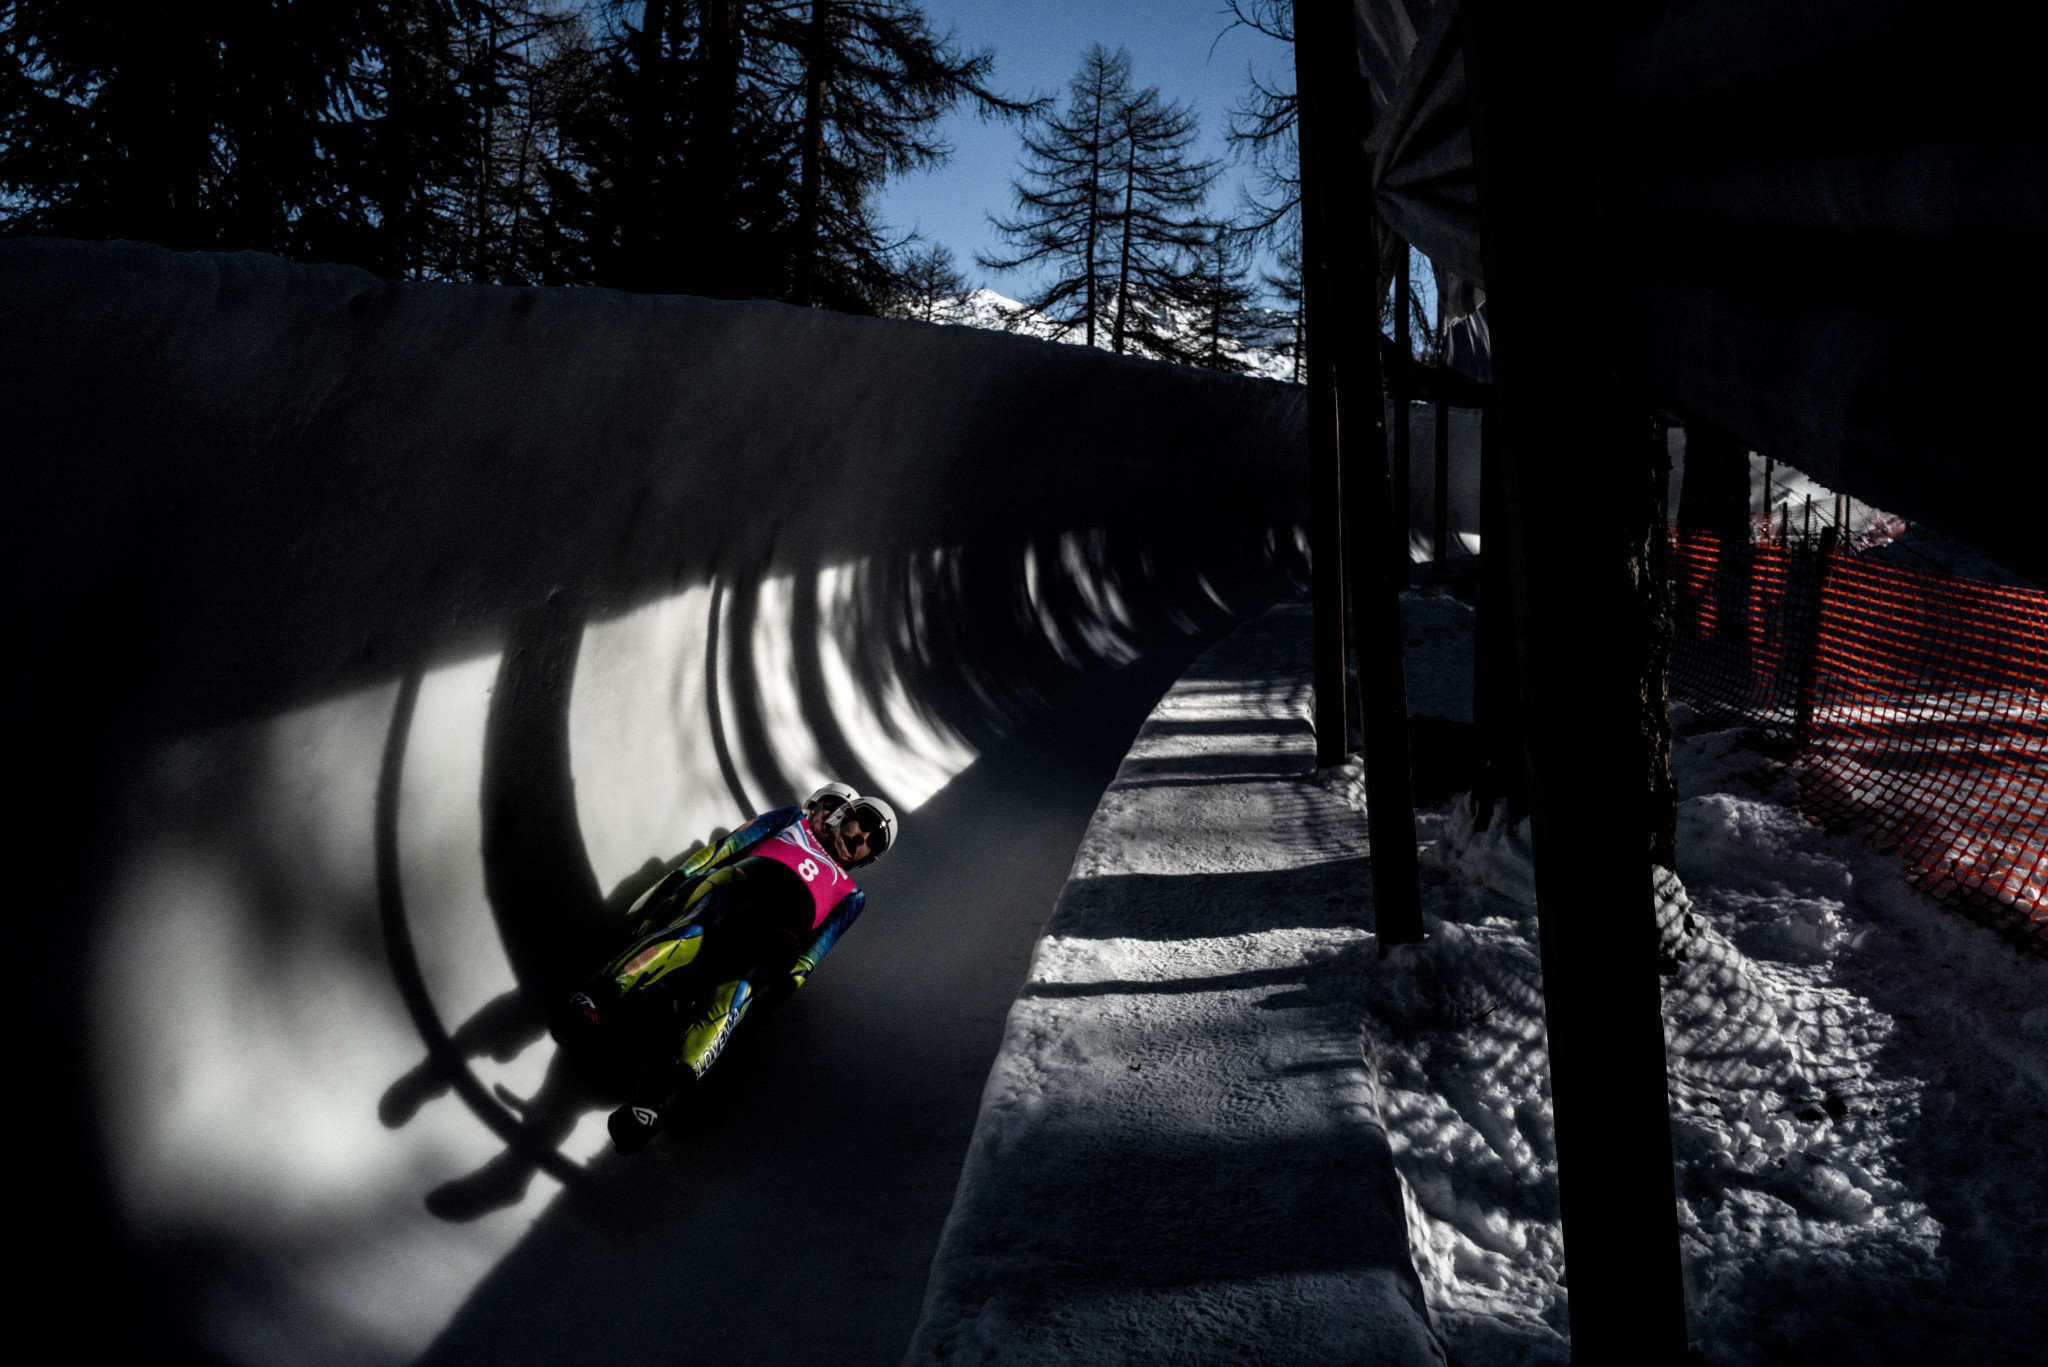 Austria, Romania, Italy and Russia are set to host events for the upcoming Luge World Cup on natural track season ©Getty Images